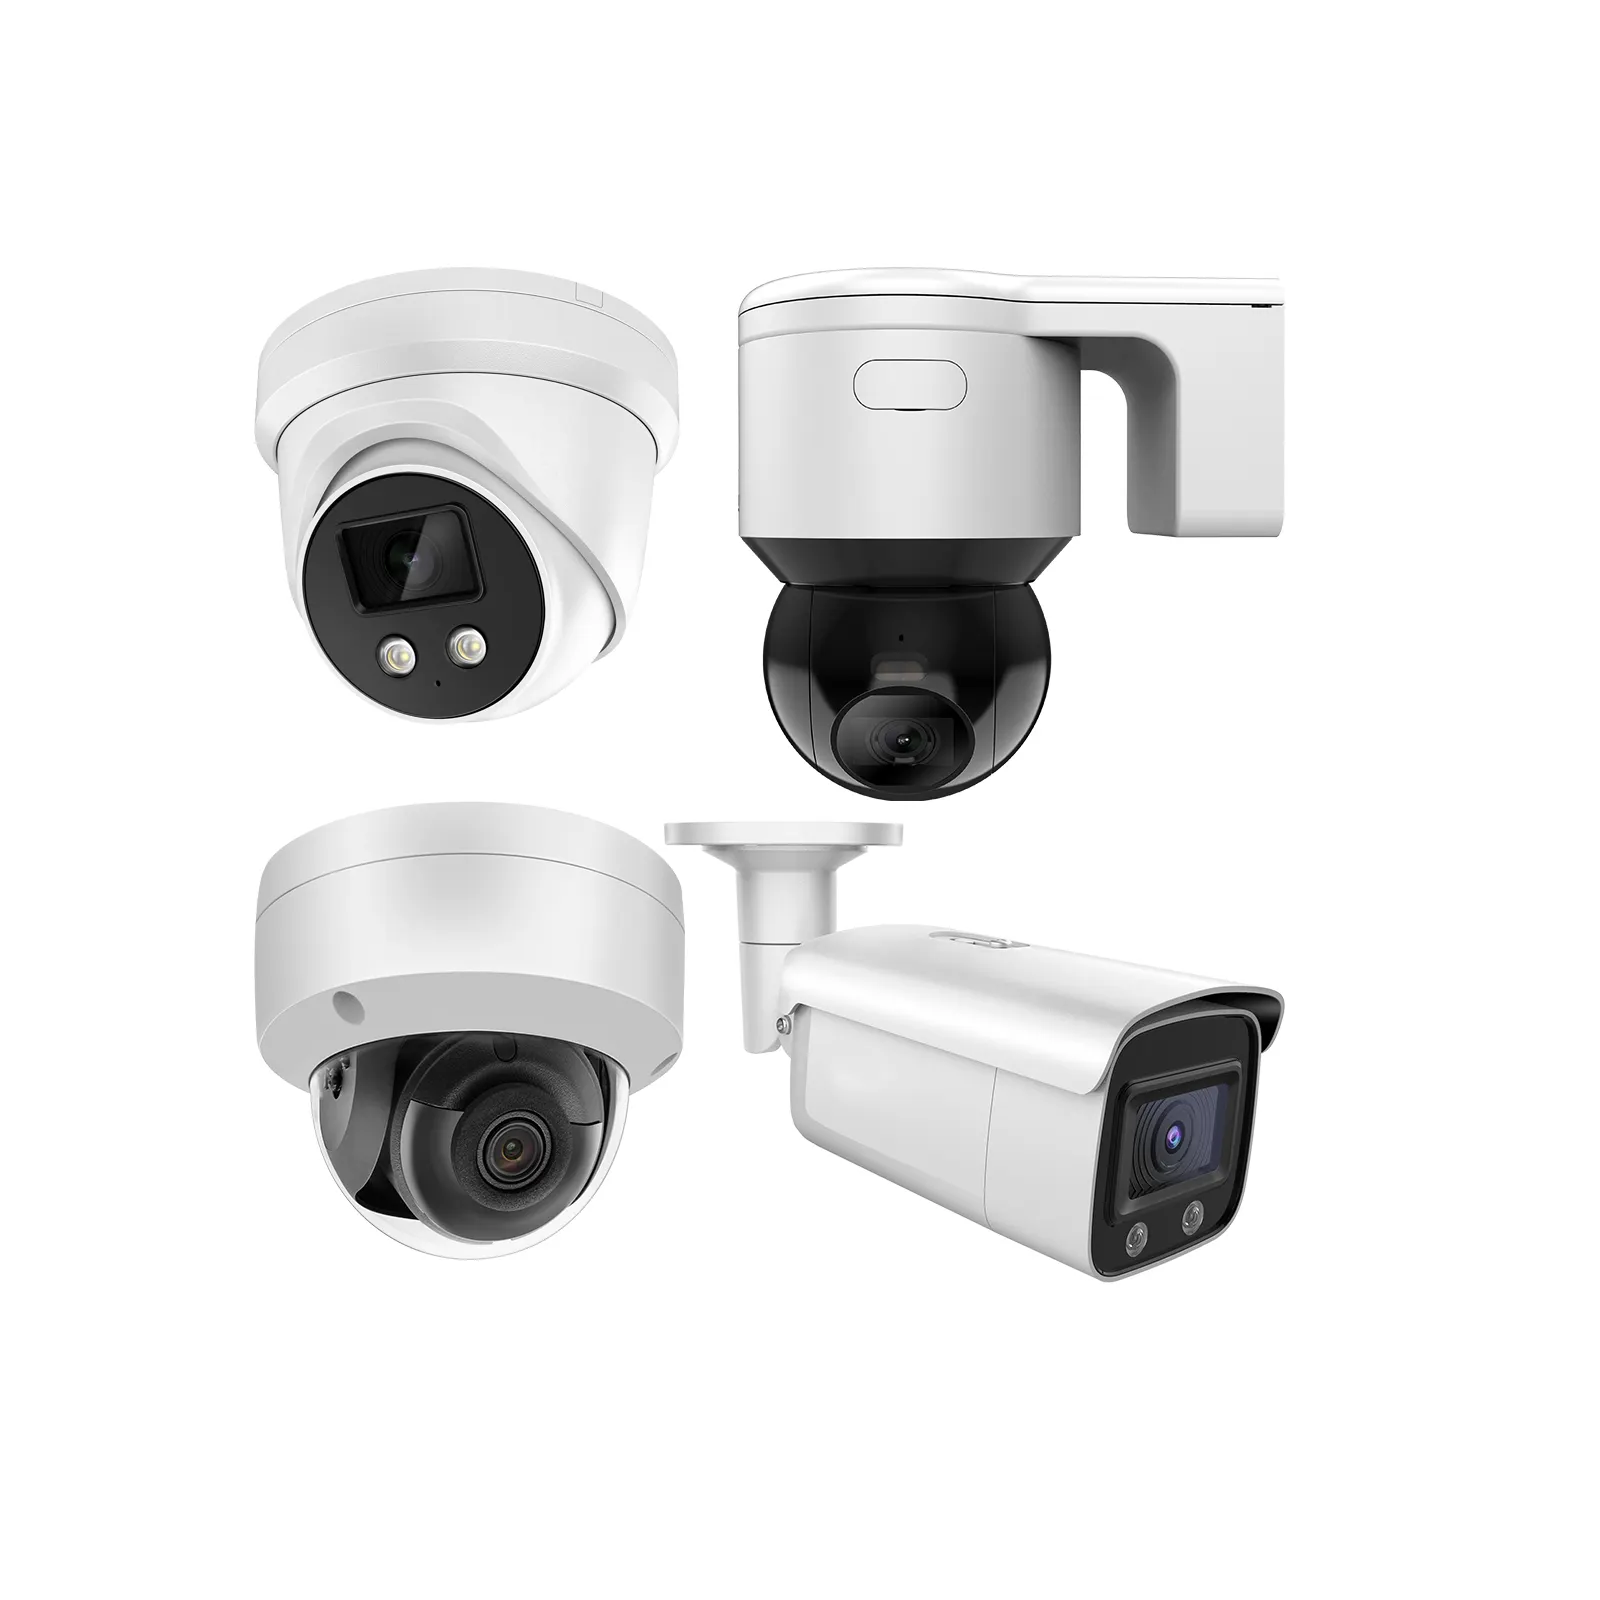 OEM HIK 2MP 4MP 6MP 8MP Bullet IP Camera Security System support oem customized service Security camera